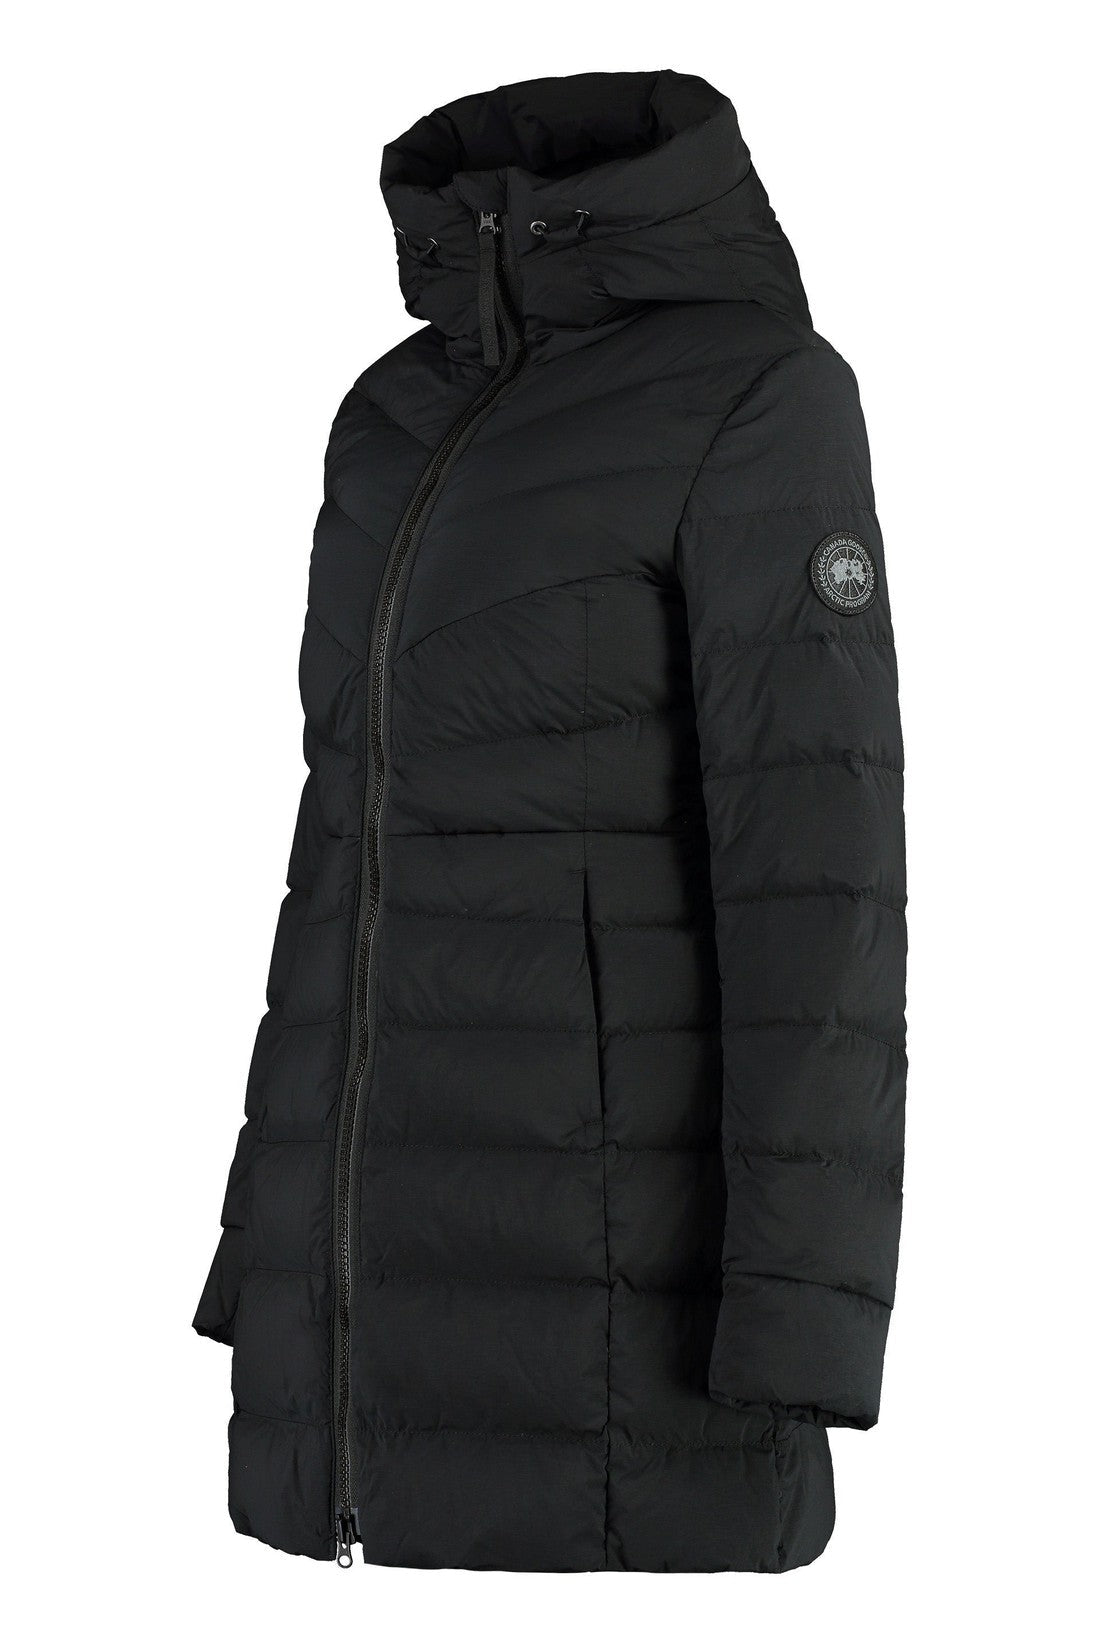 Canada Goose Black-OUTLET-SALE-Clair hooded nylon down jacket-ARCHIVIST